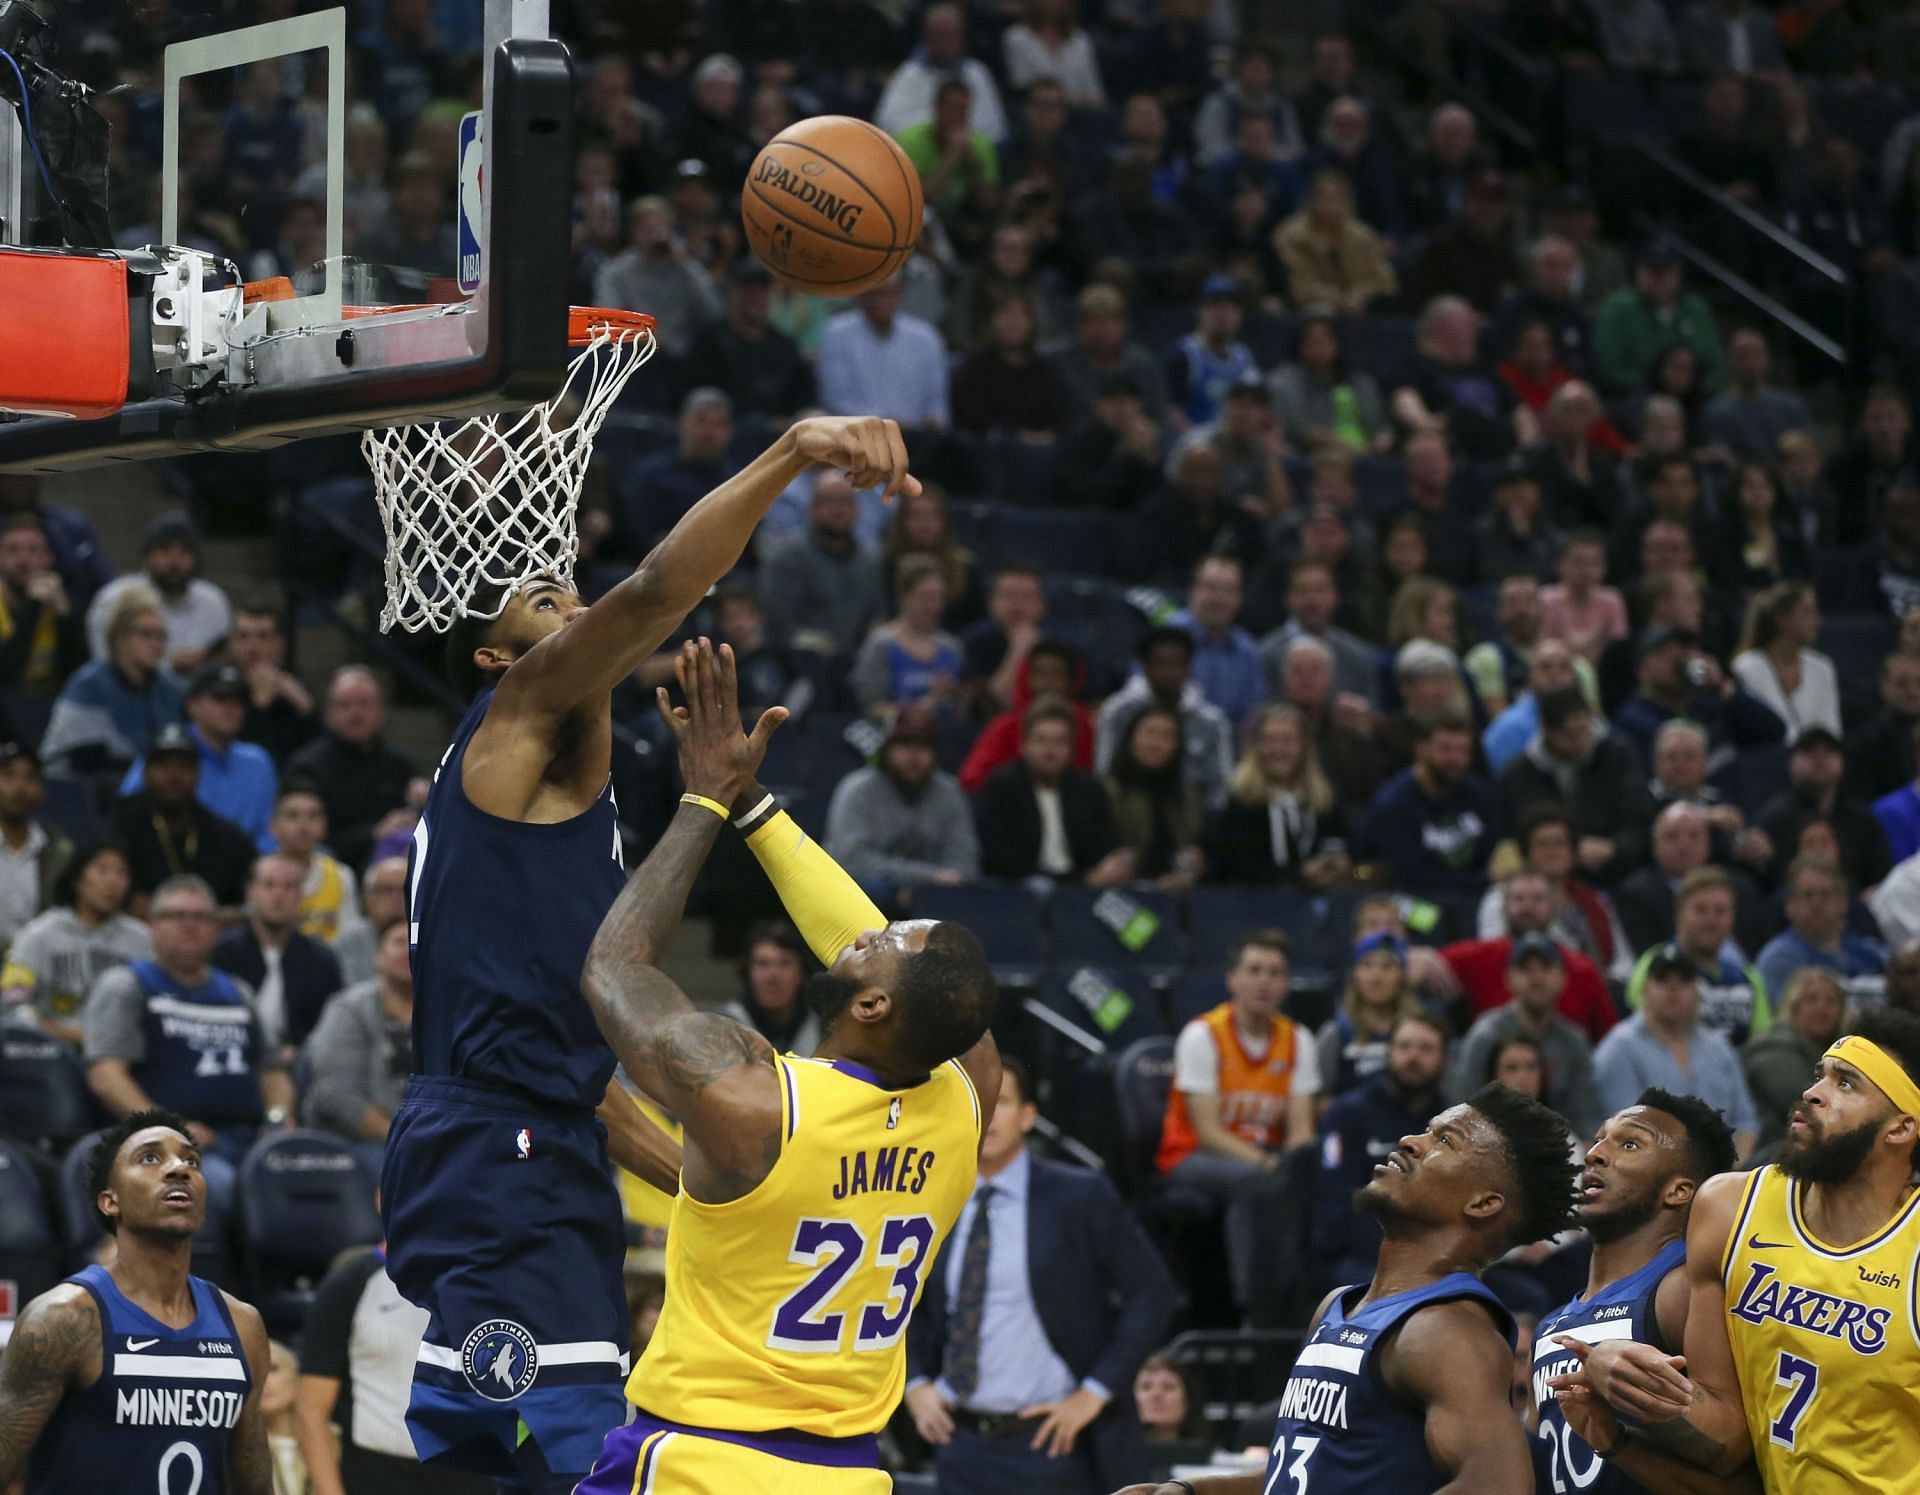 The LA Lakers and Minnesota Timberwolves will meet for the fourth and final time this season on Wednesday. [Photo: Star Tribune]